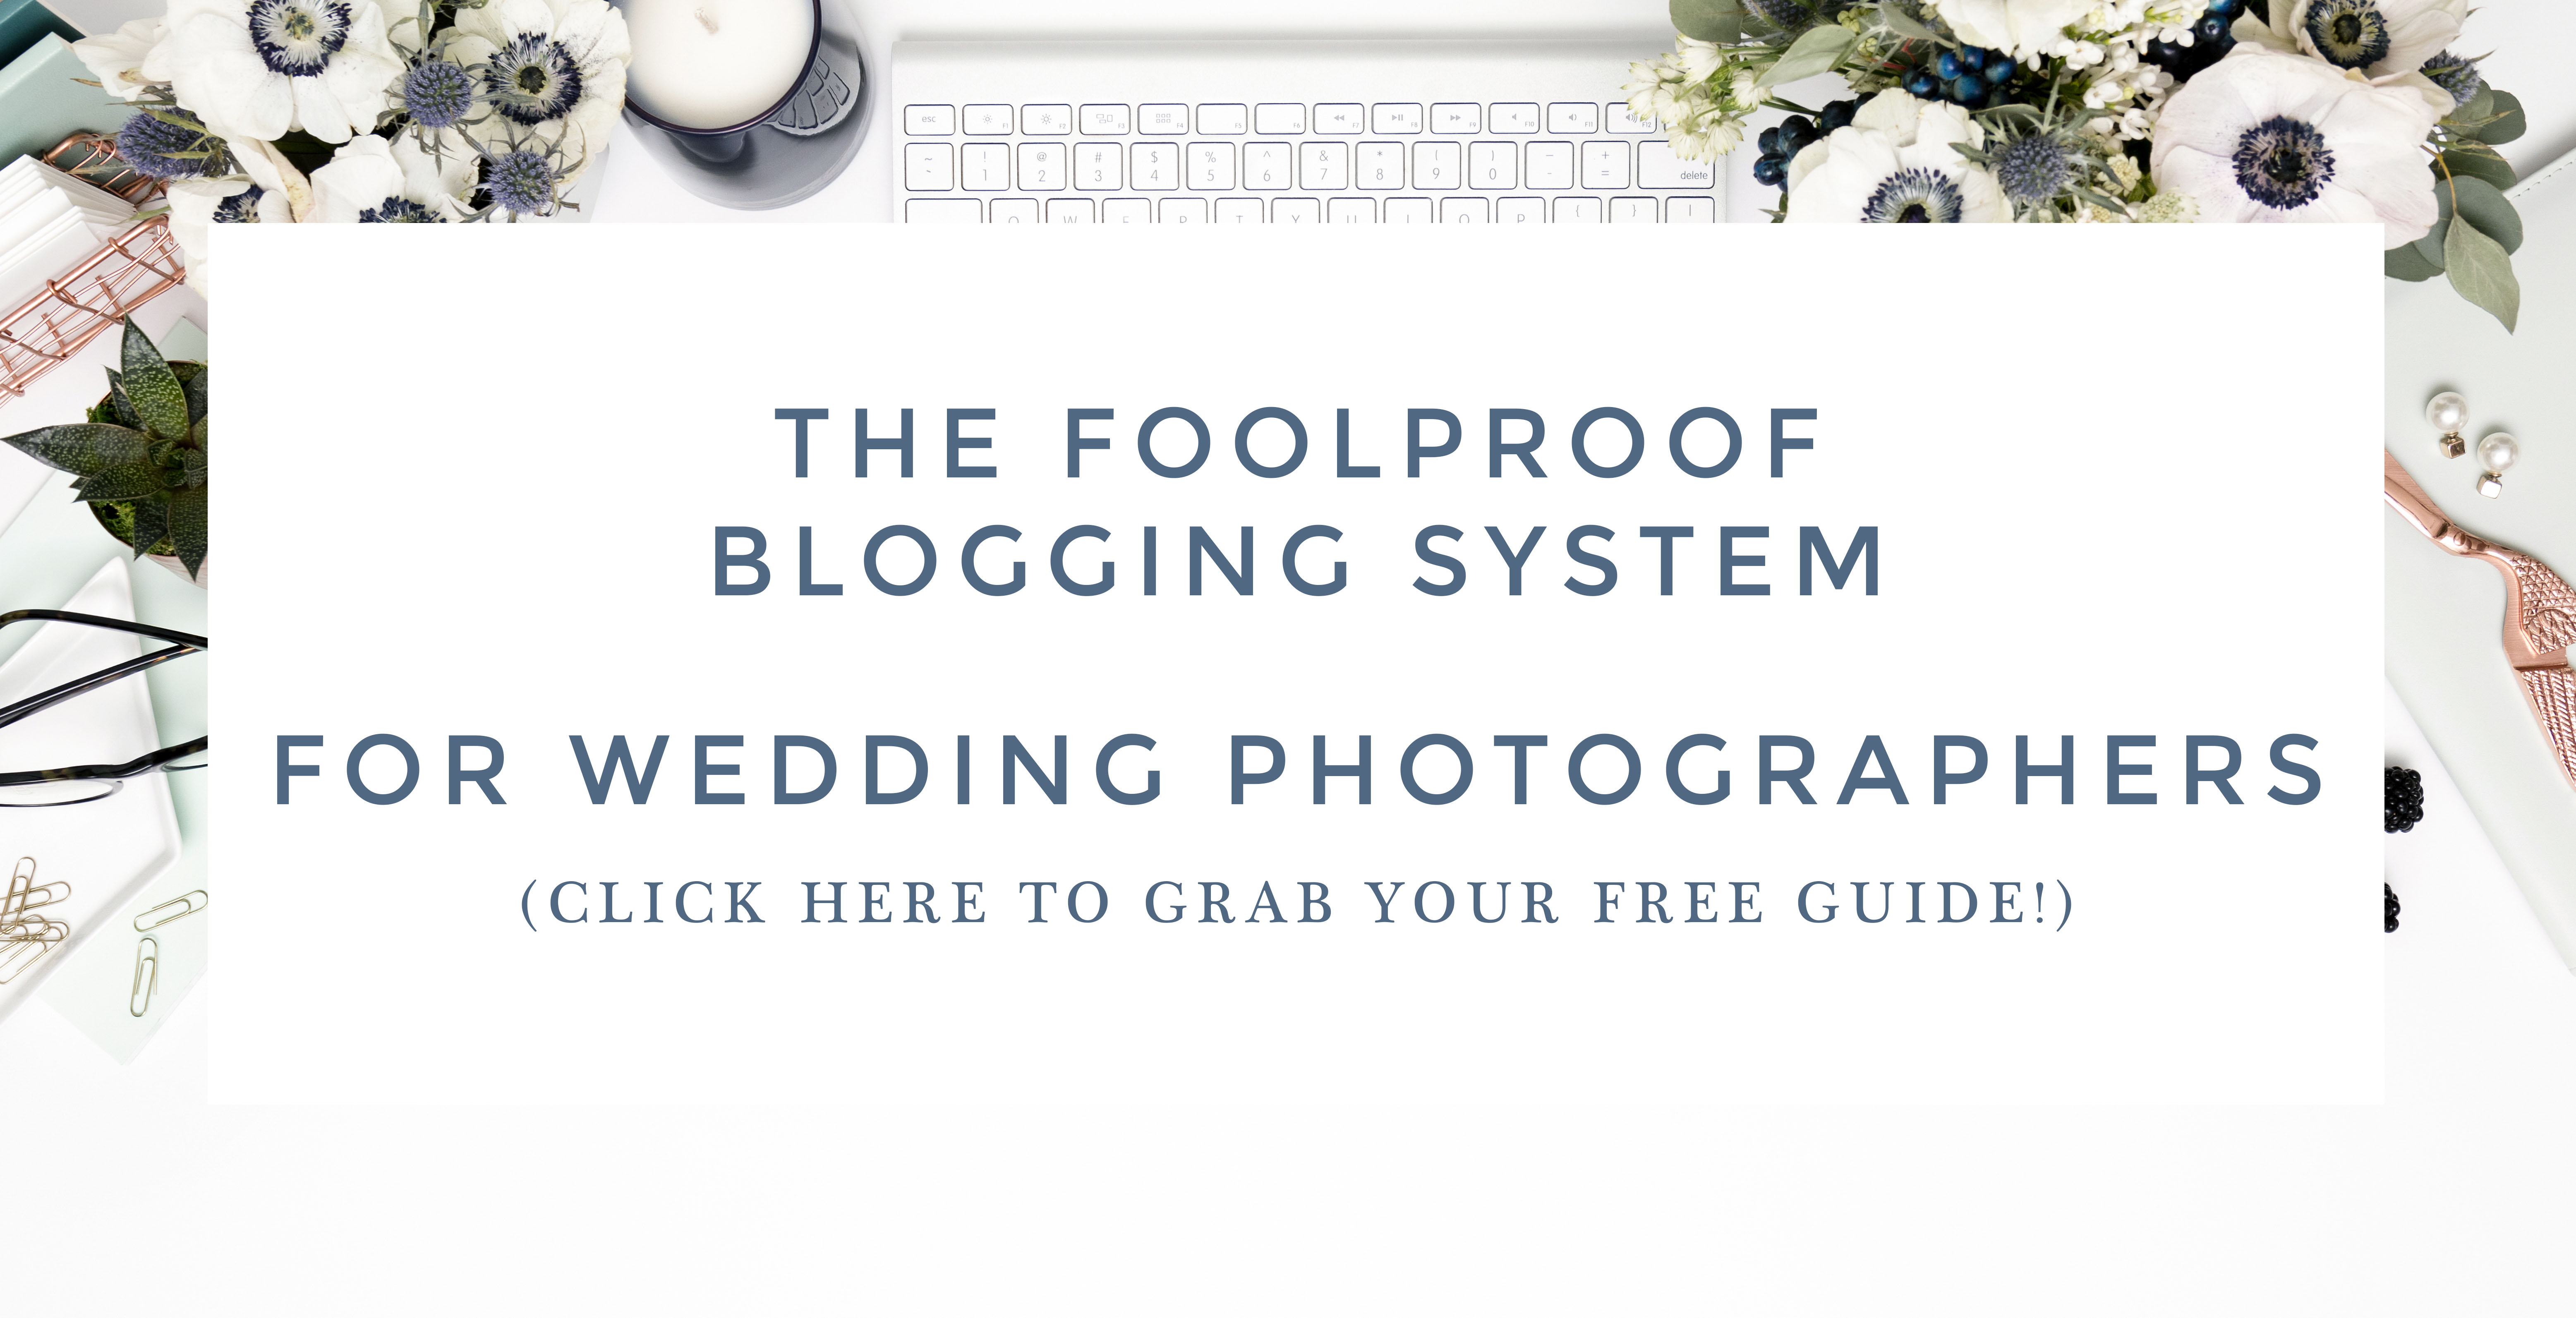 click-here-to-grab-your-free-guide-for-blogging-system2